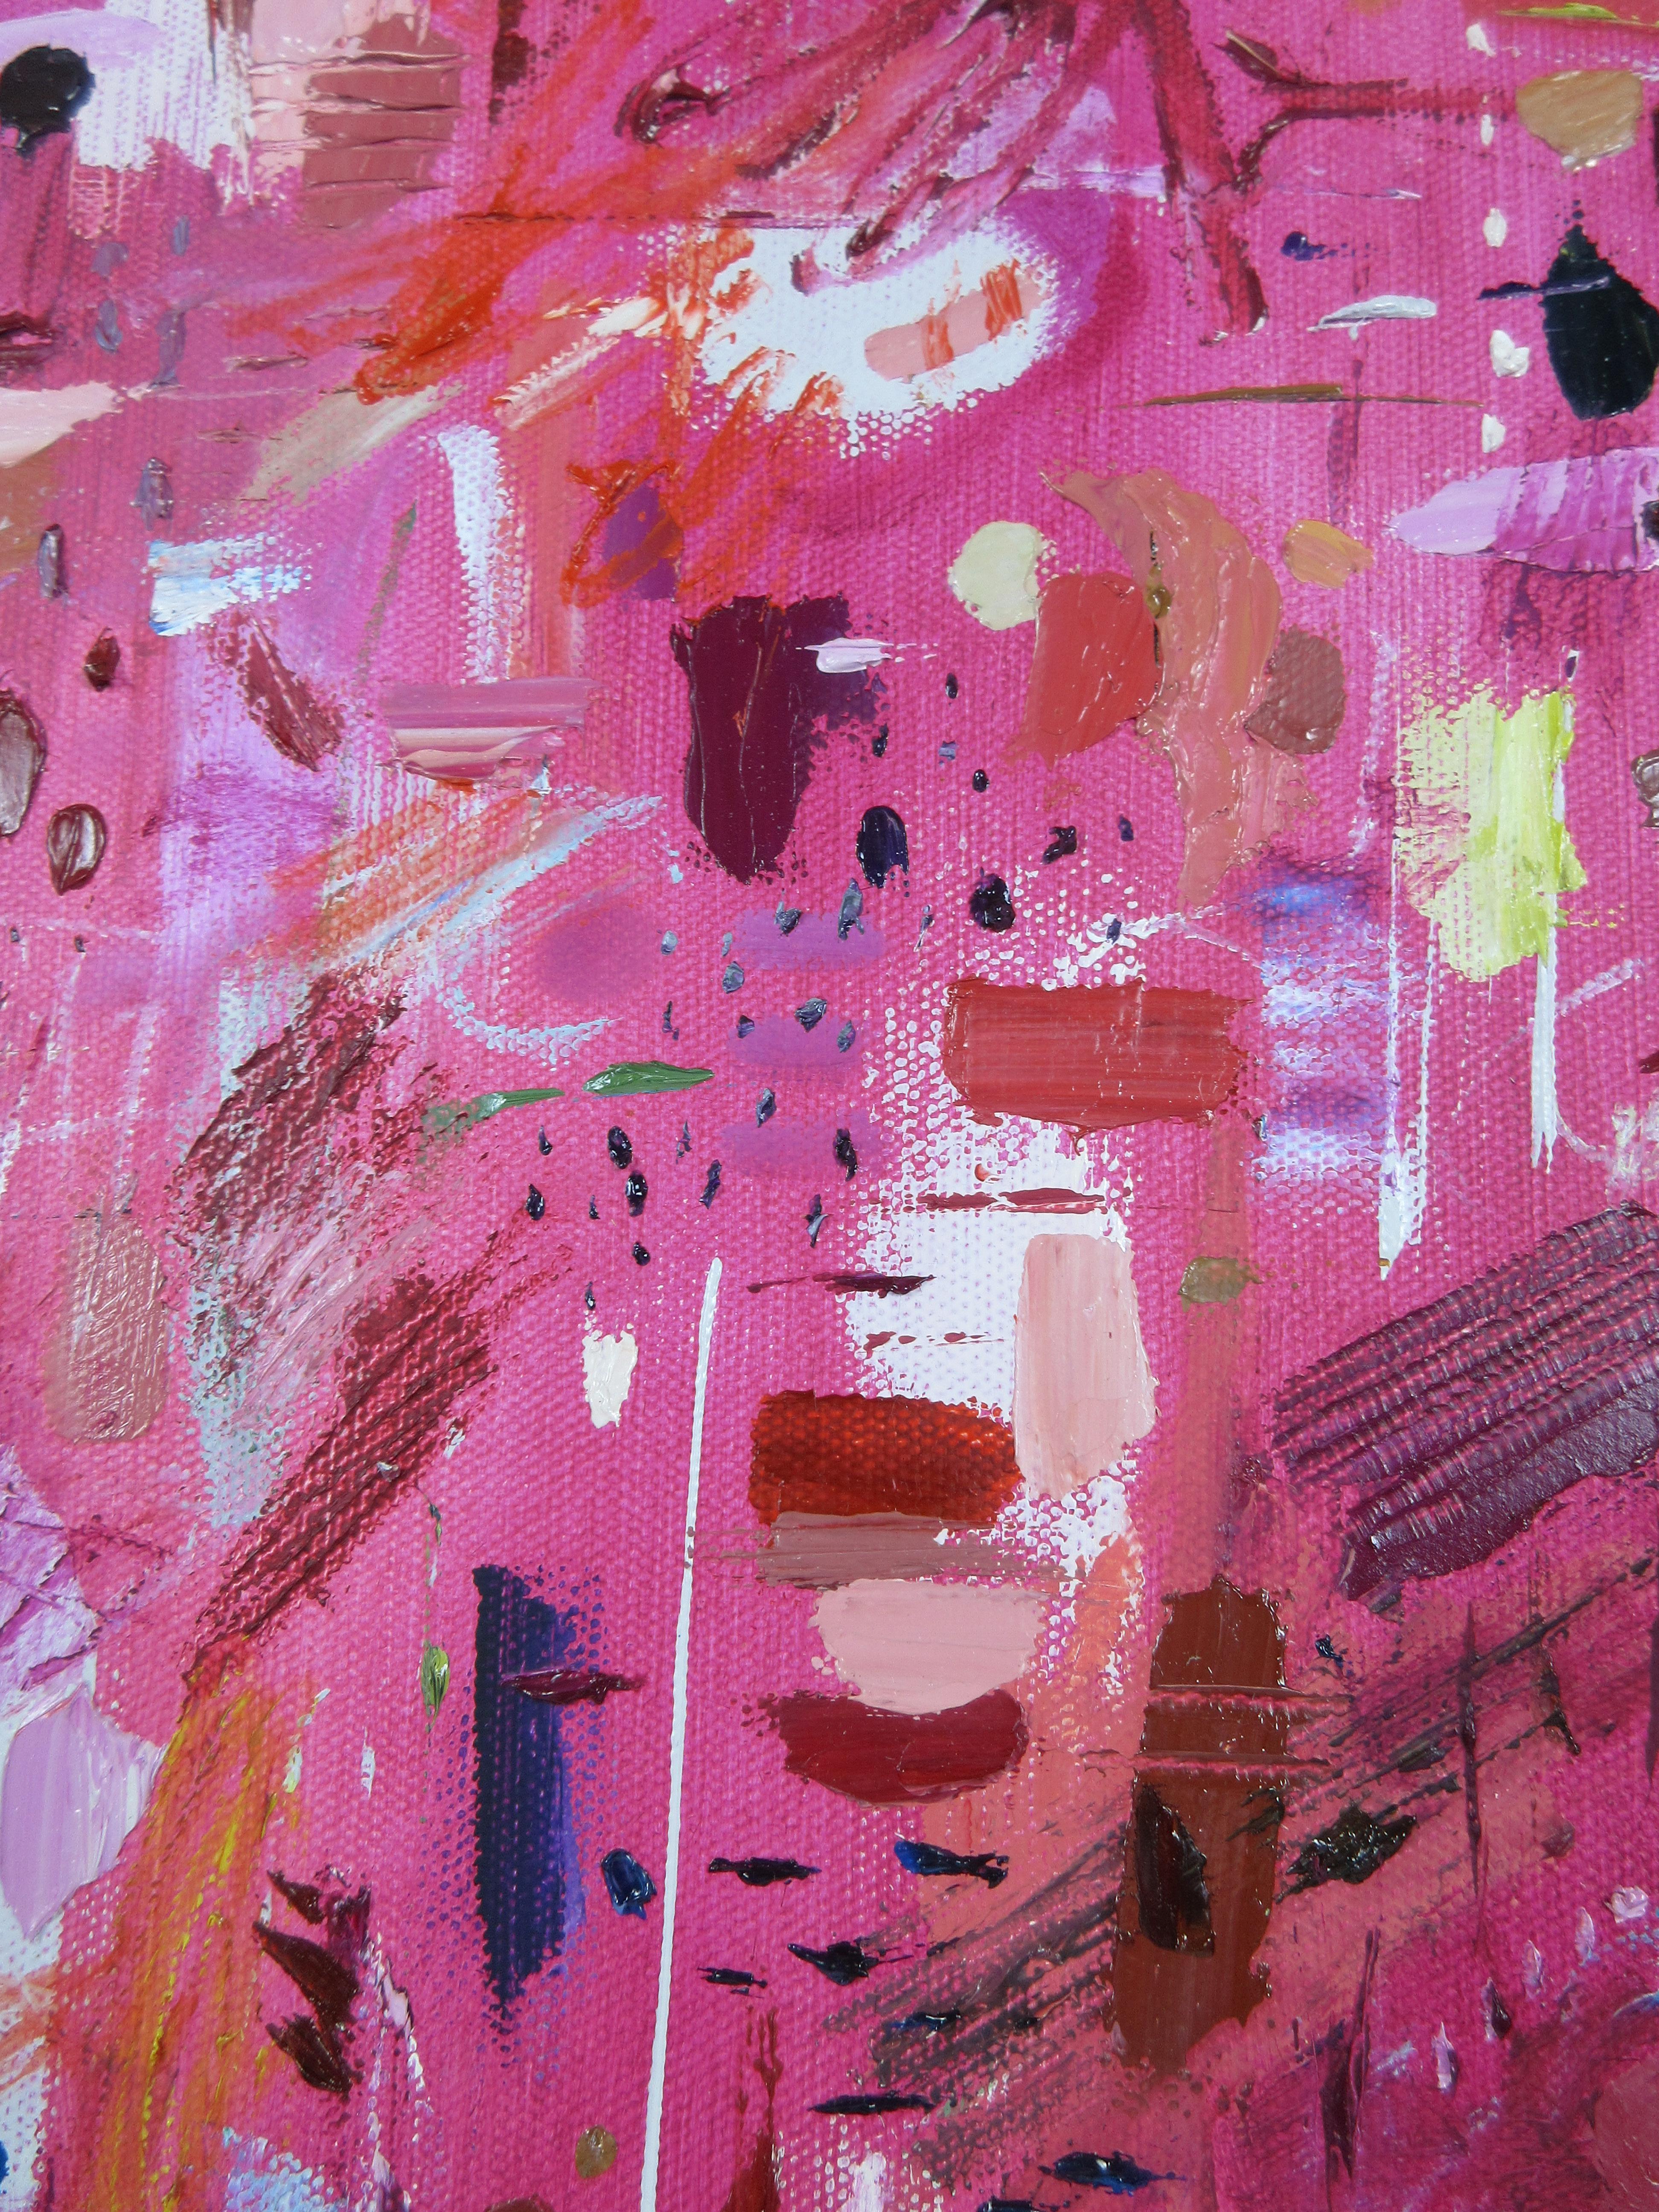 On Pink
Oil on Canvas
30.5 by 30.5cm

Valerie Ng’s abstract paintings are created through explorations in colour, light, form and texture. A dynamic balance of strokes and subtle variations to convey a sense of mood and movement on the surface. She